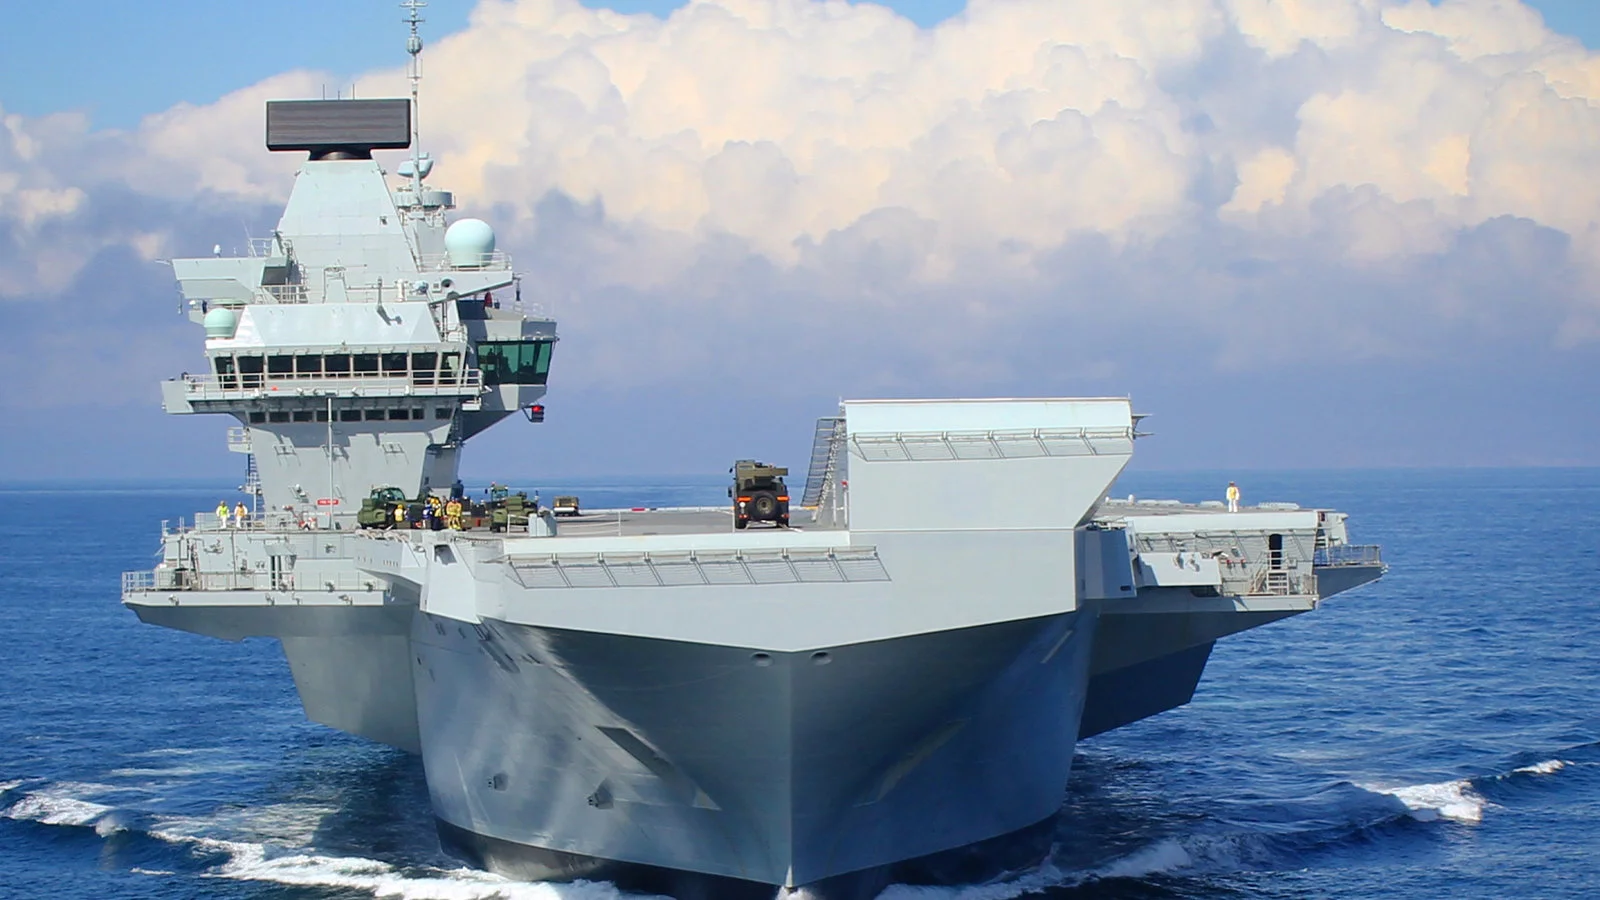 The biggest British warship has to stop on its way to the US because of a “mechanical issue.”